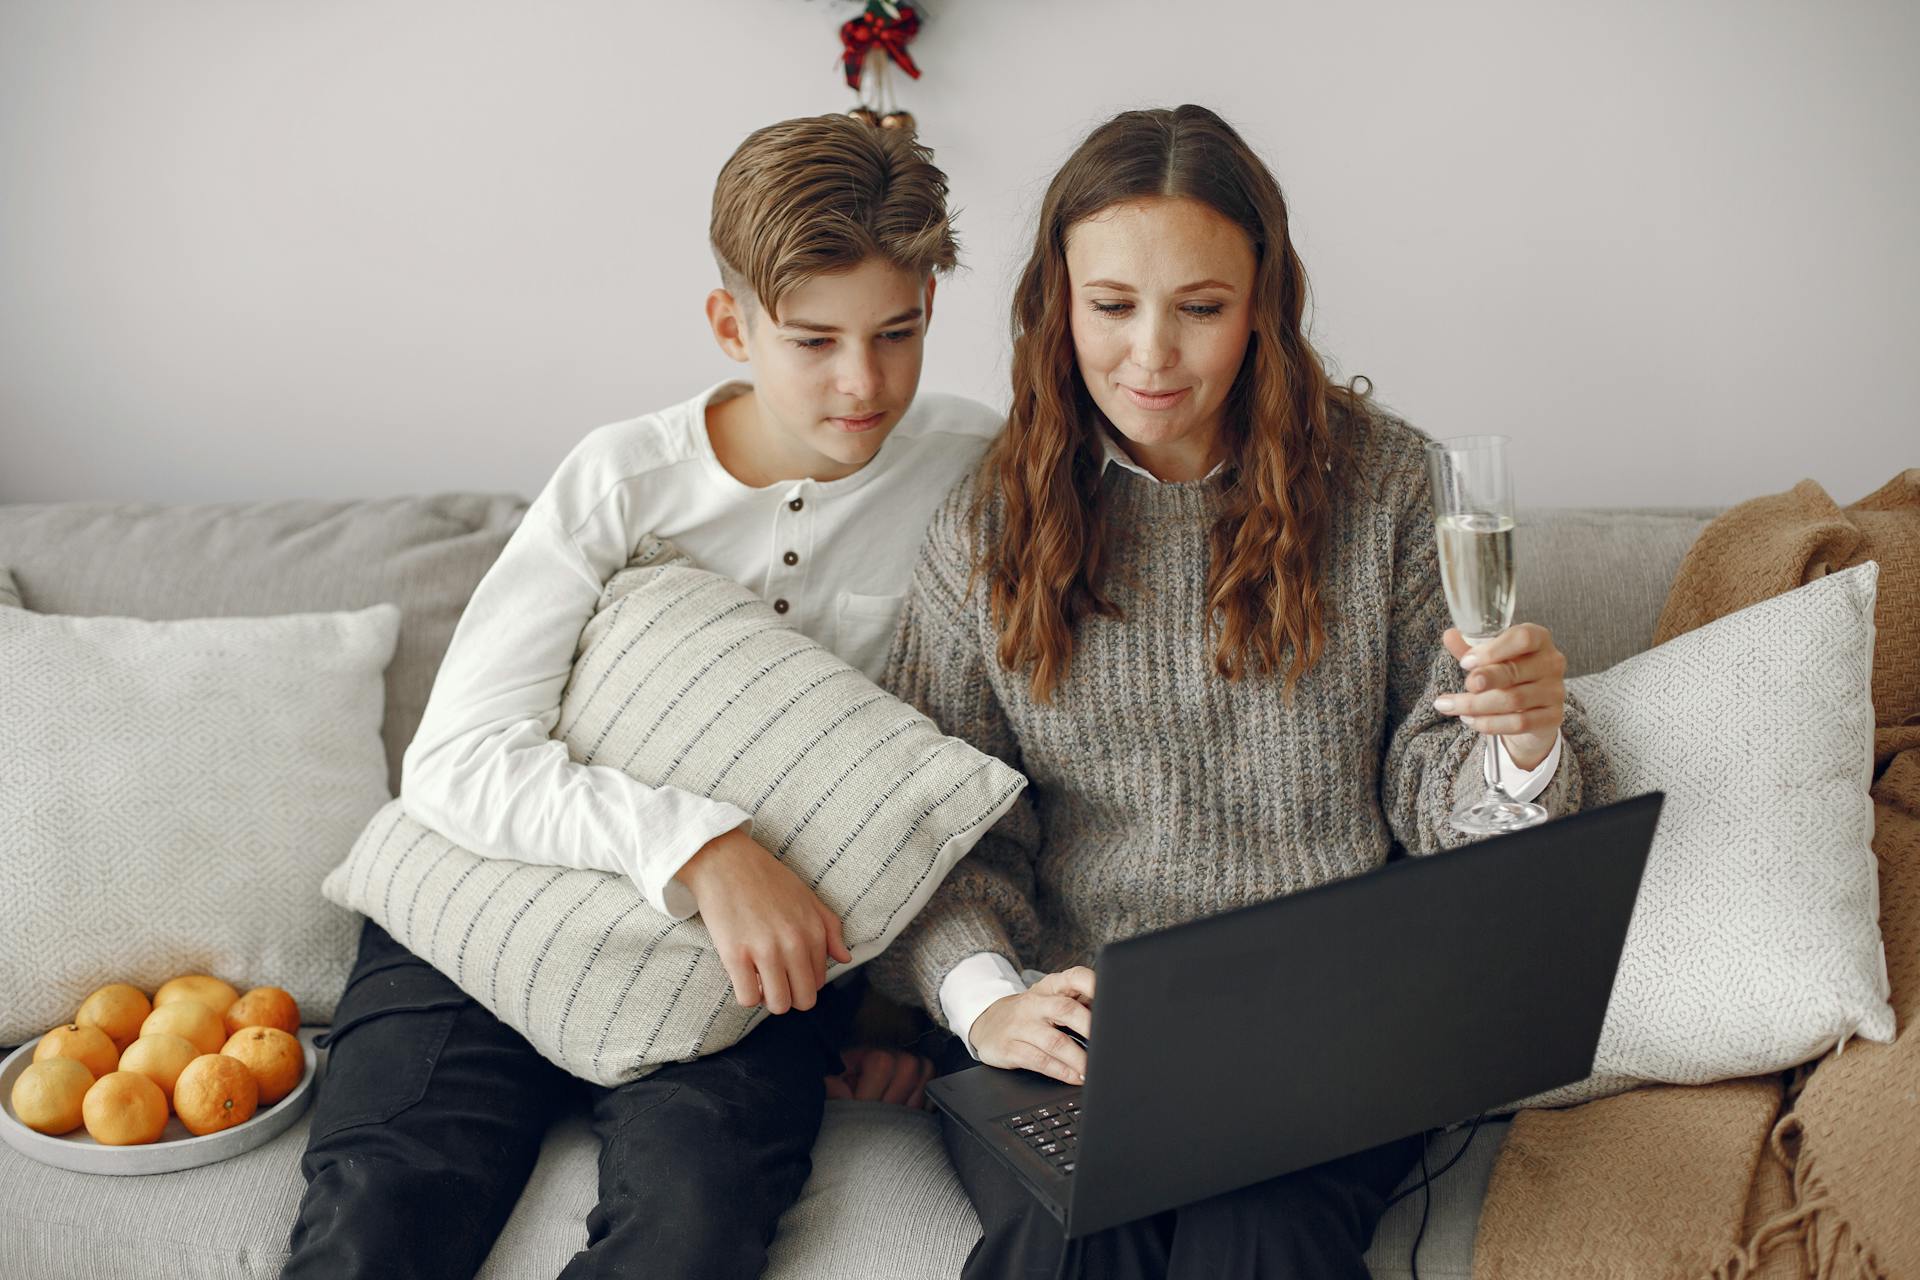 A mother-son duo sitting on a couch and using a laptop | Source: Pexels